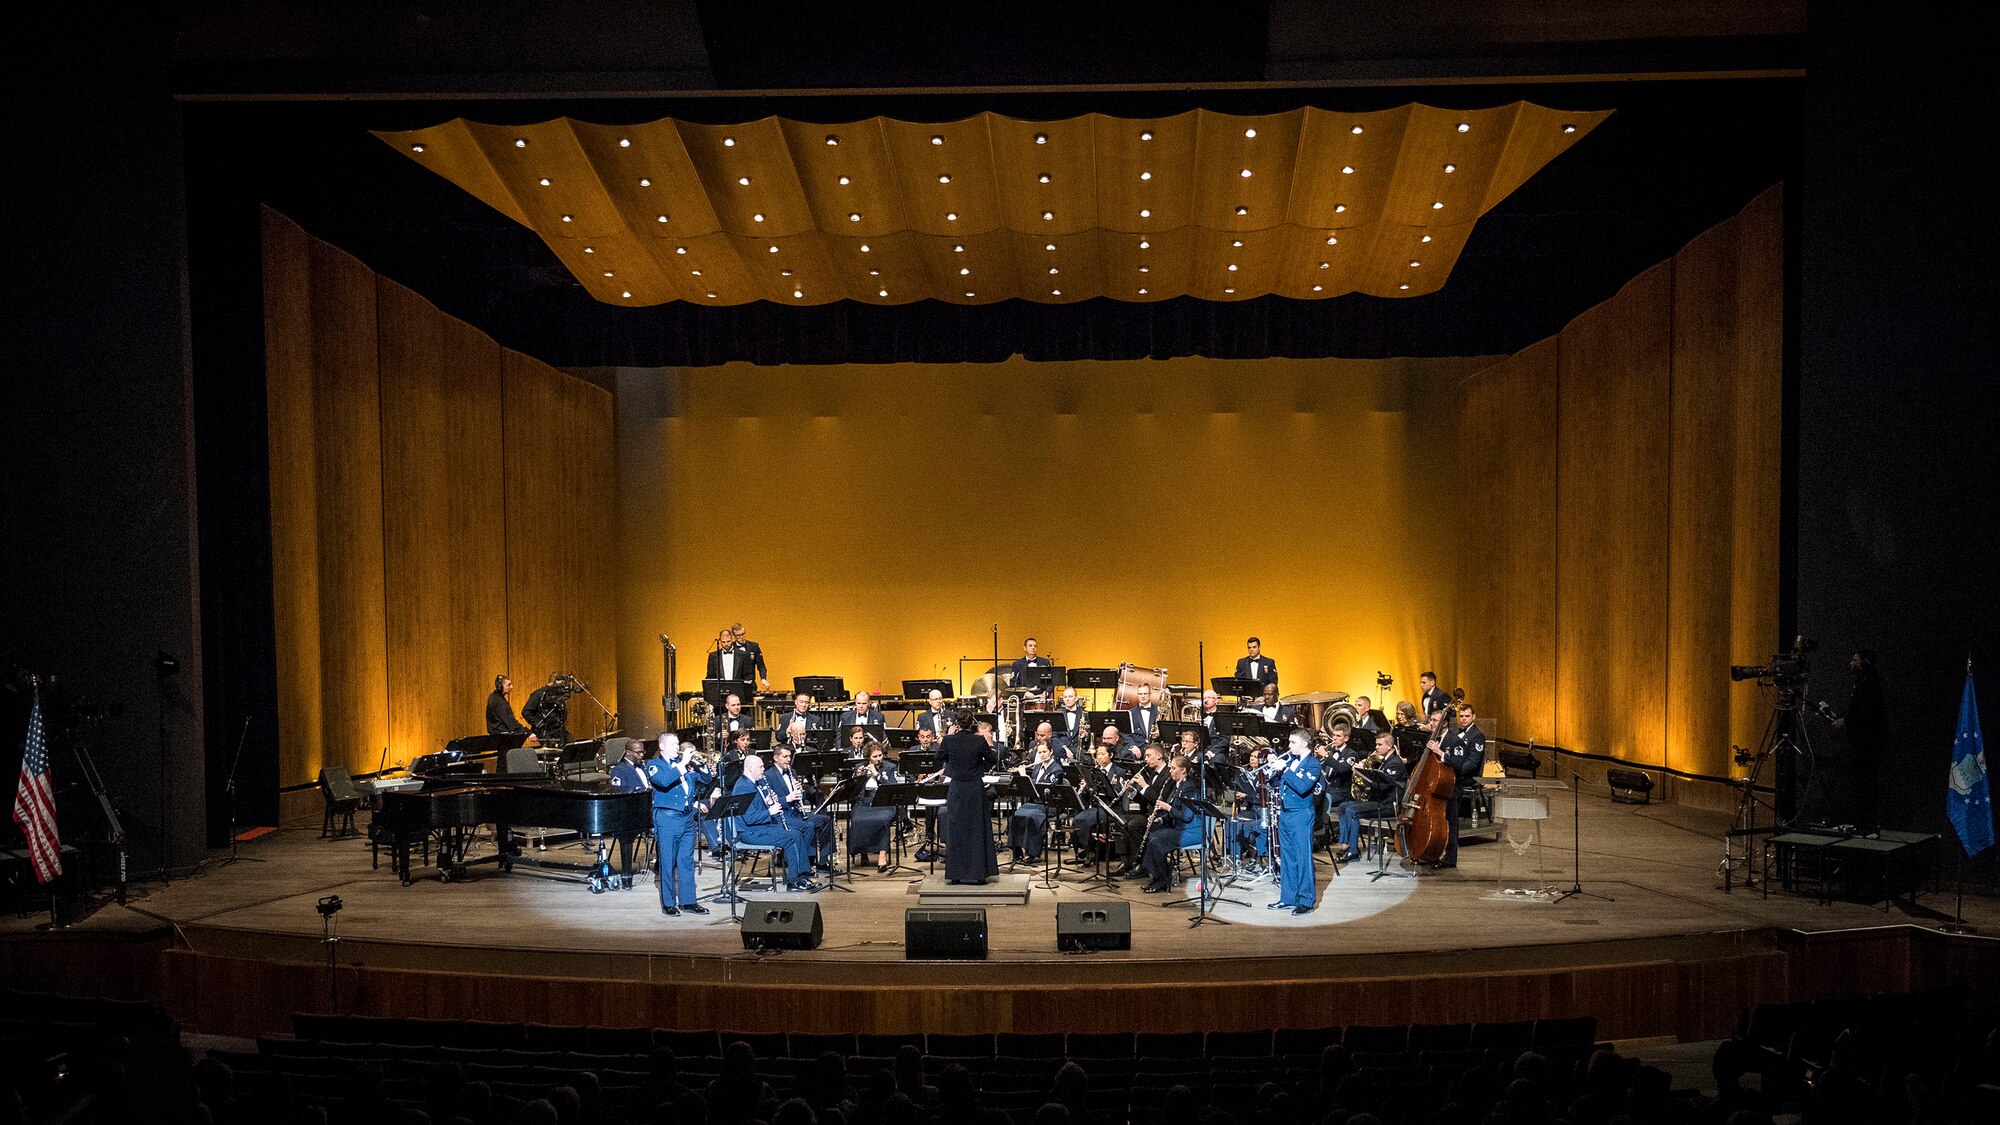 The U.S. Air Force Academy Band performs Feb. 13 at Weber State University’s Austad Auditorium, Ogden, Utah. (U.S. Air Force photo)